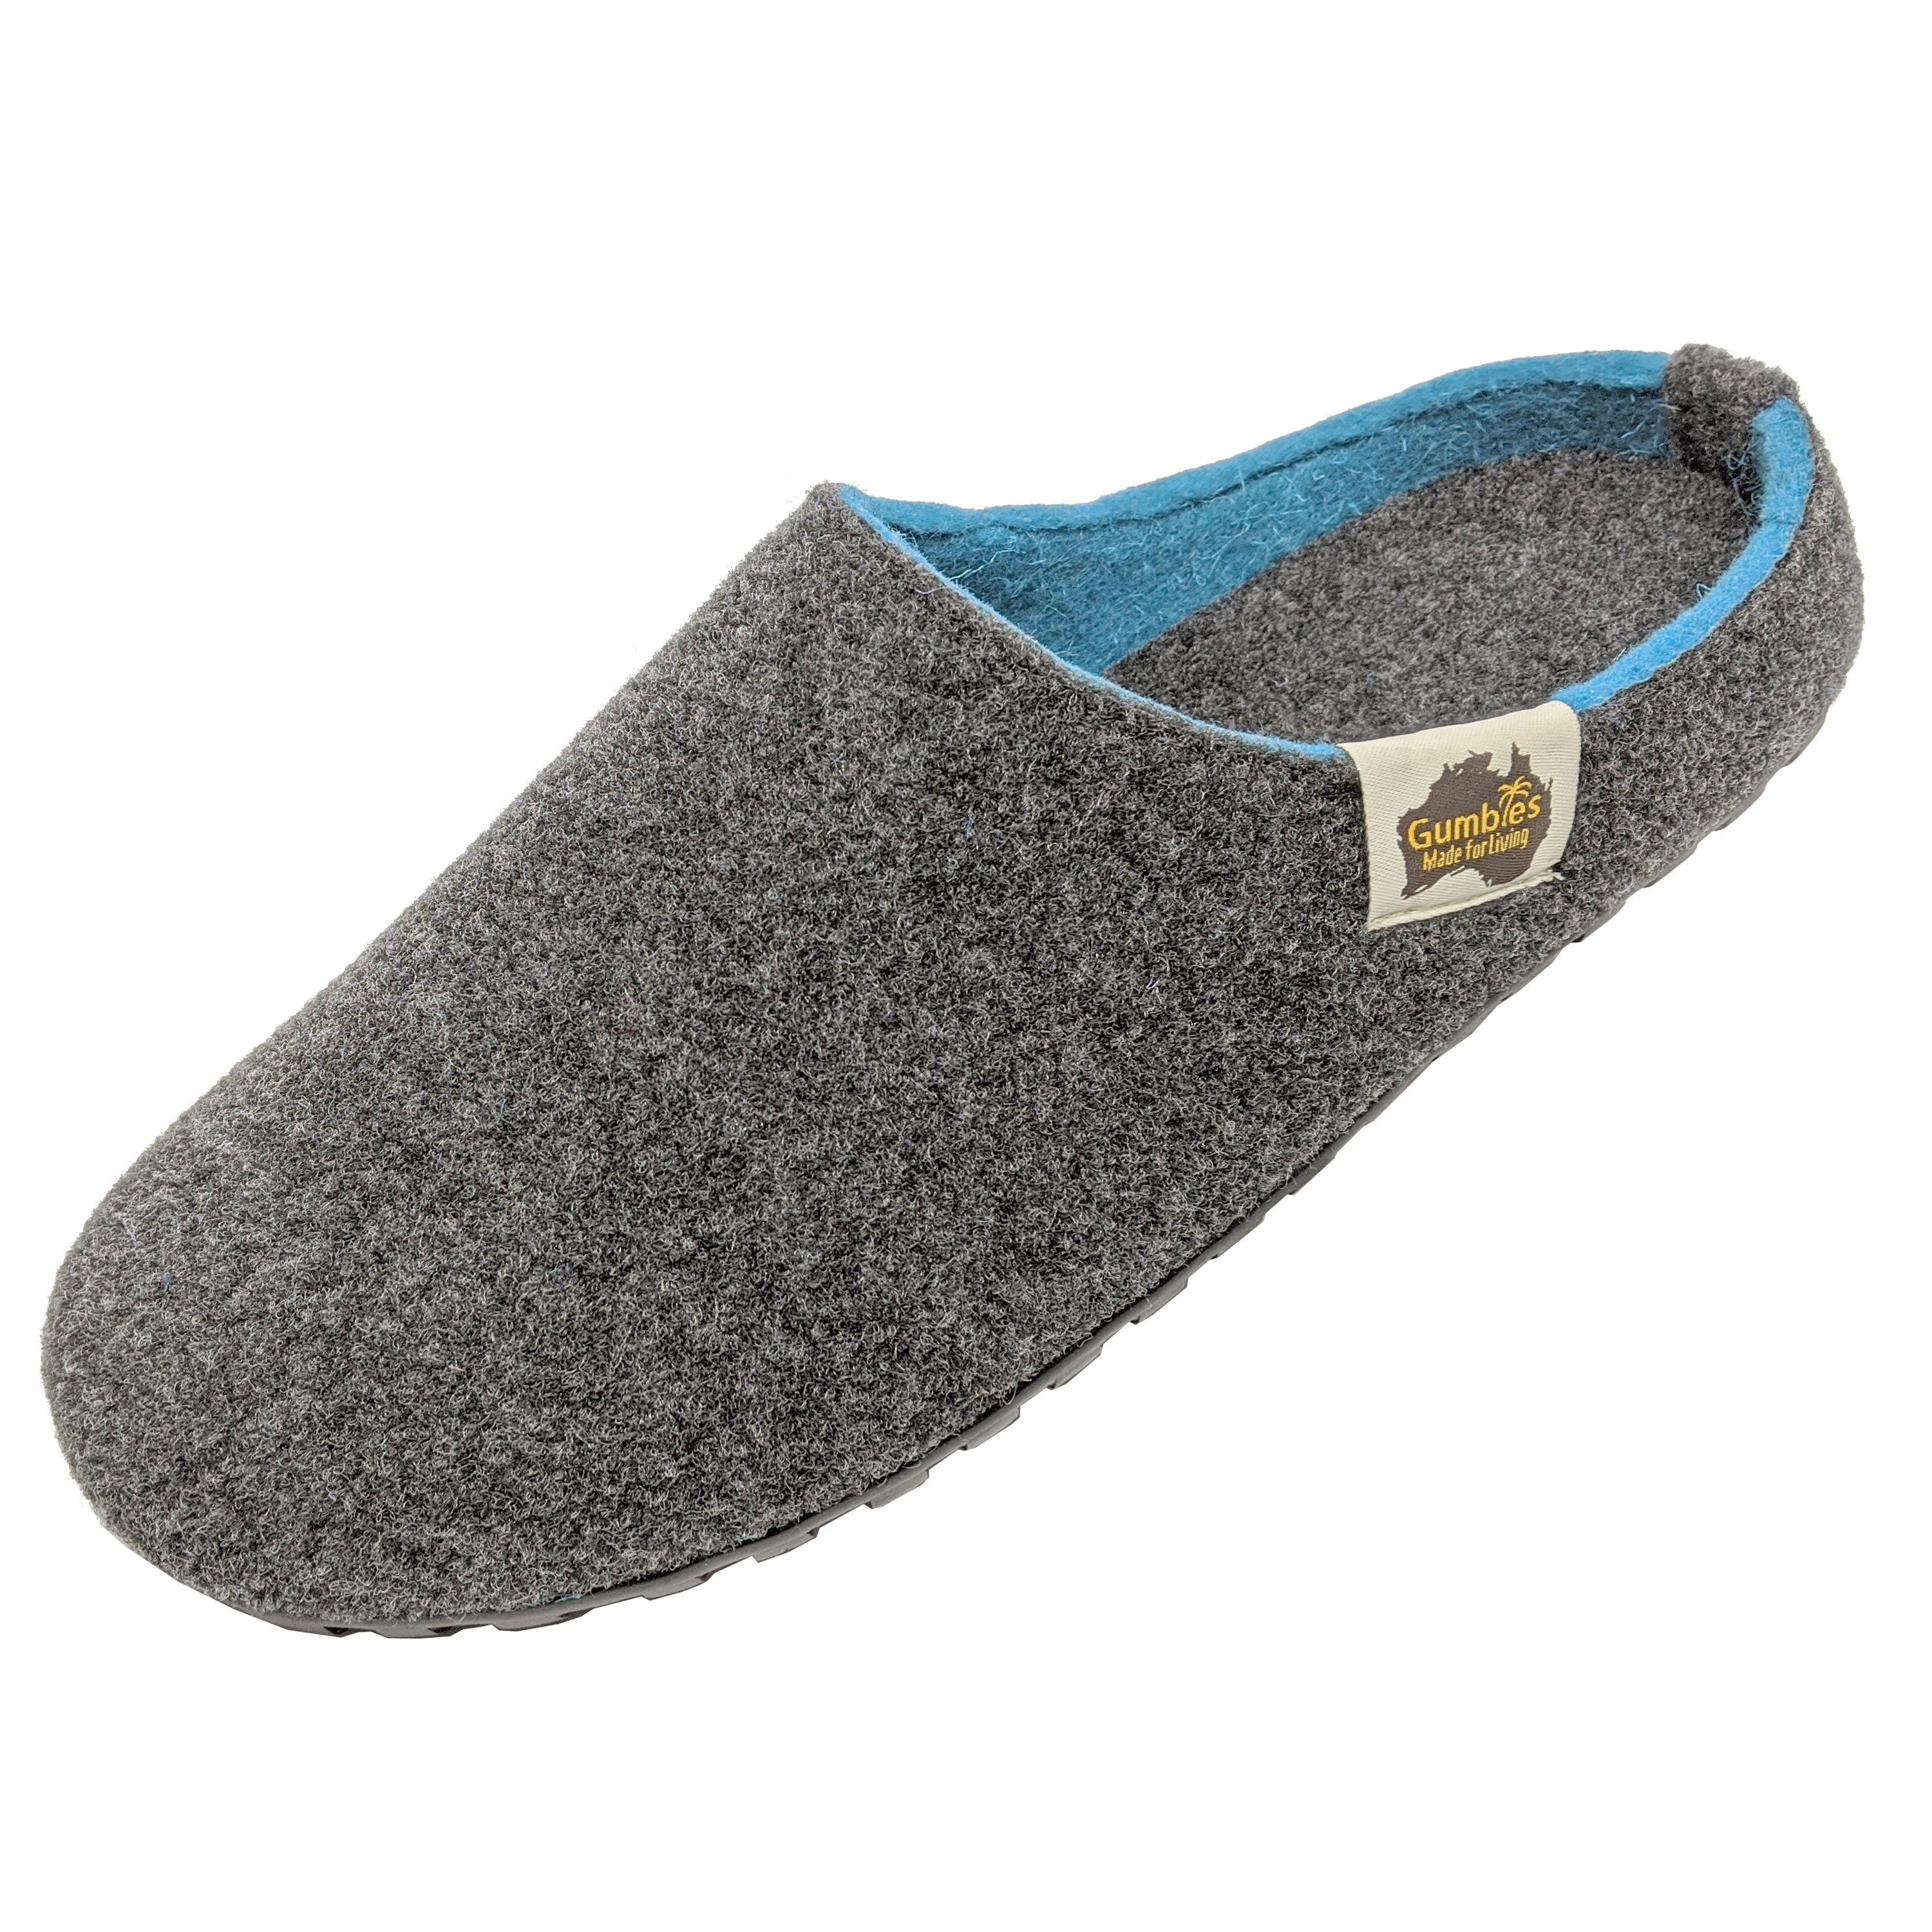 Gumbies Materialien Turquoise Designs« Outback charcoal-turquoise aus recycelten Charcoal farbenfrohen Slipper »in Hausschuh in